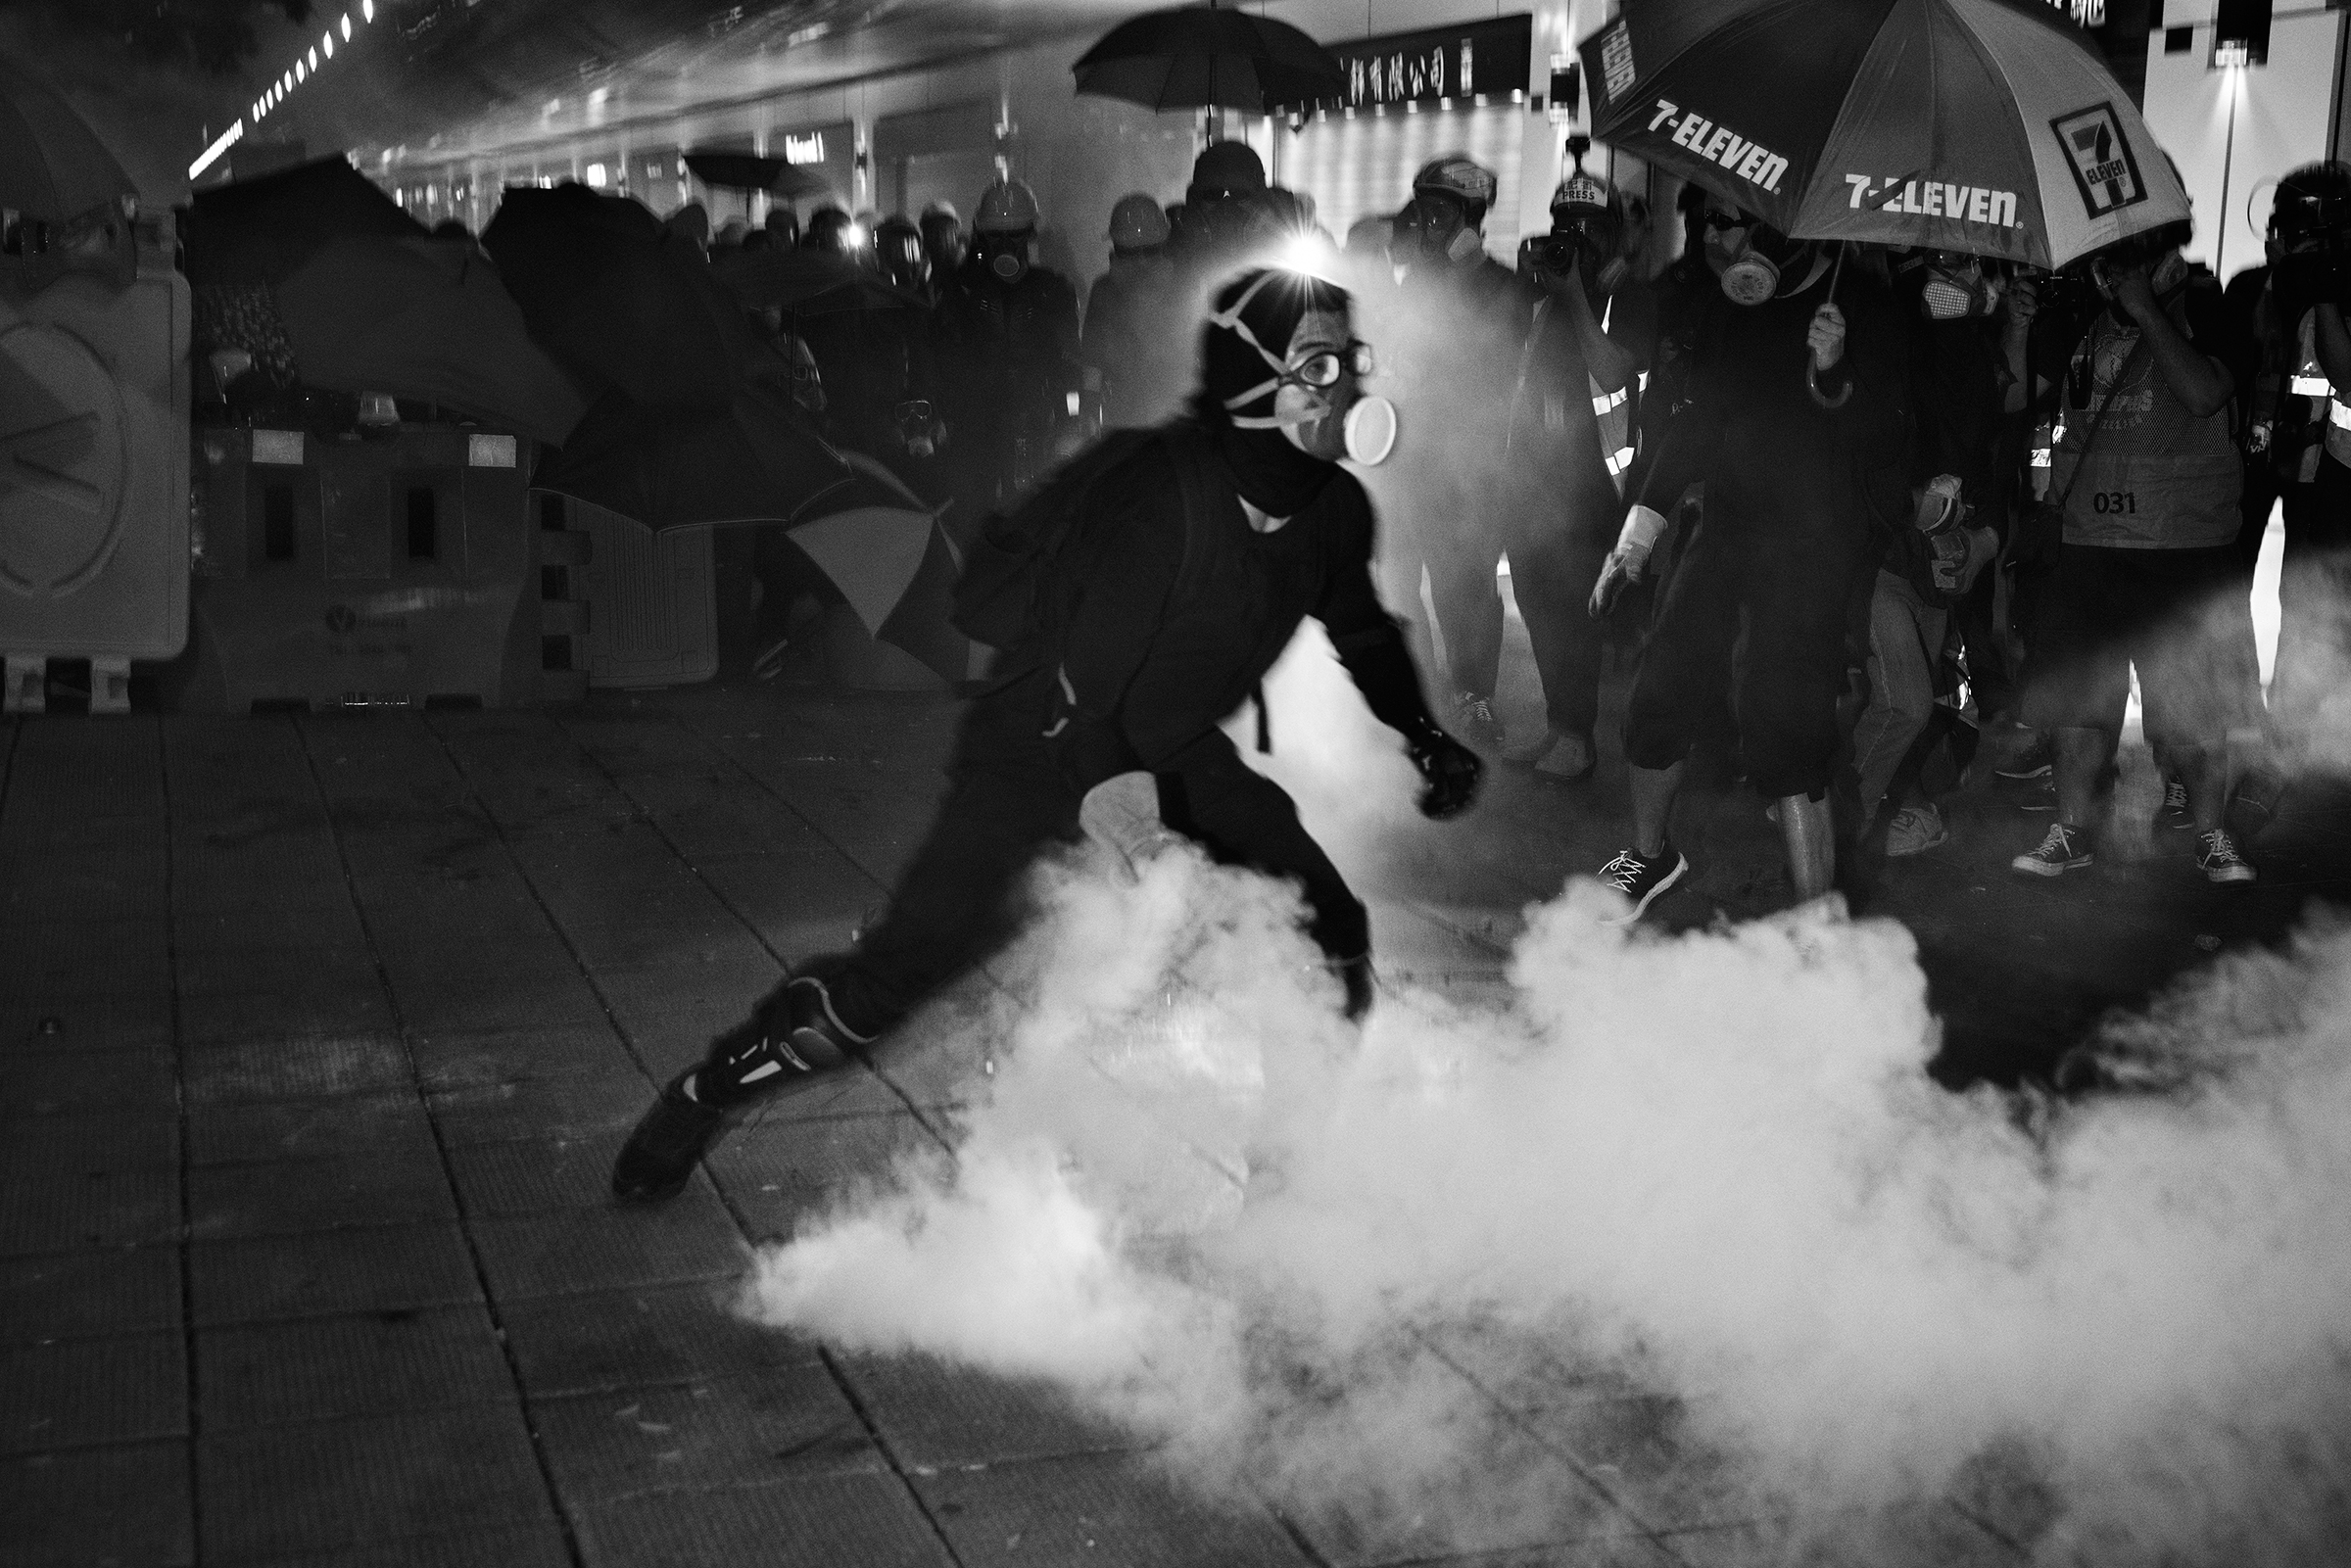 A protester throws a live tear-gas canister back at riot police during a protest near Tsim Sha Tsui police station in Kowloon, Hong Kong, on Aug. 11.